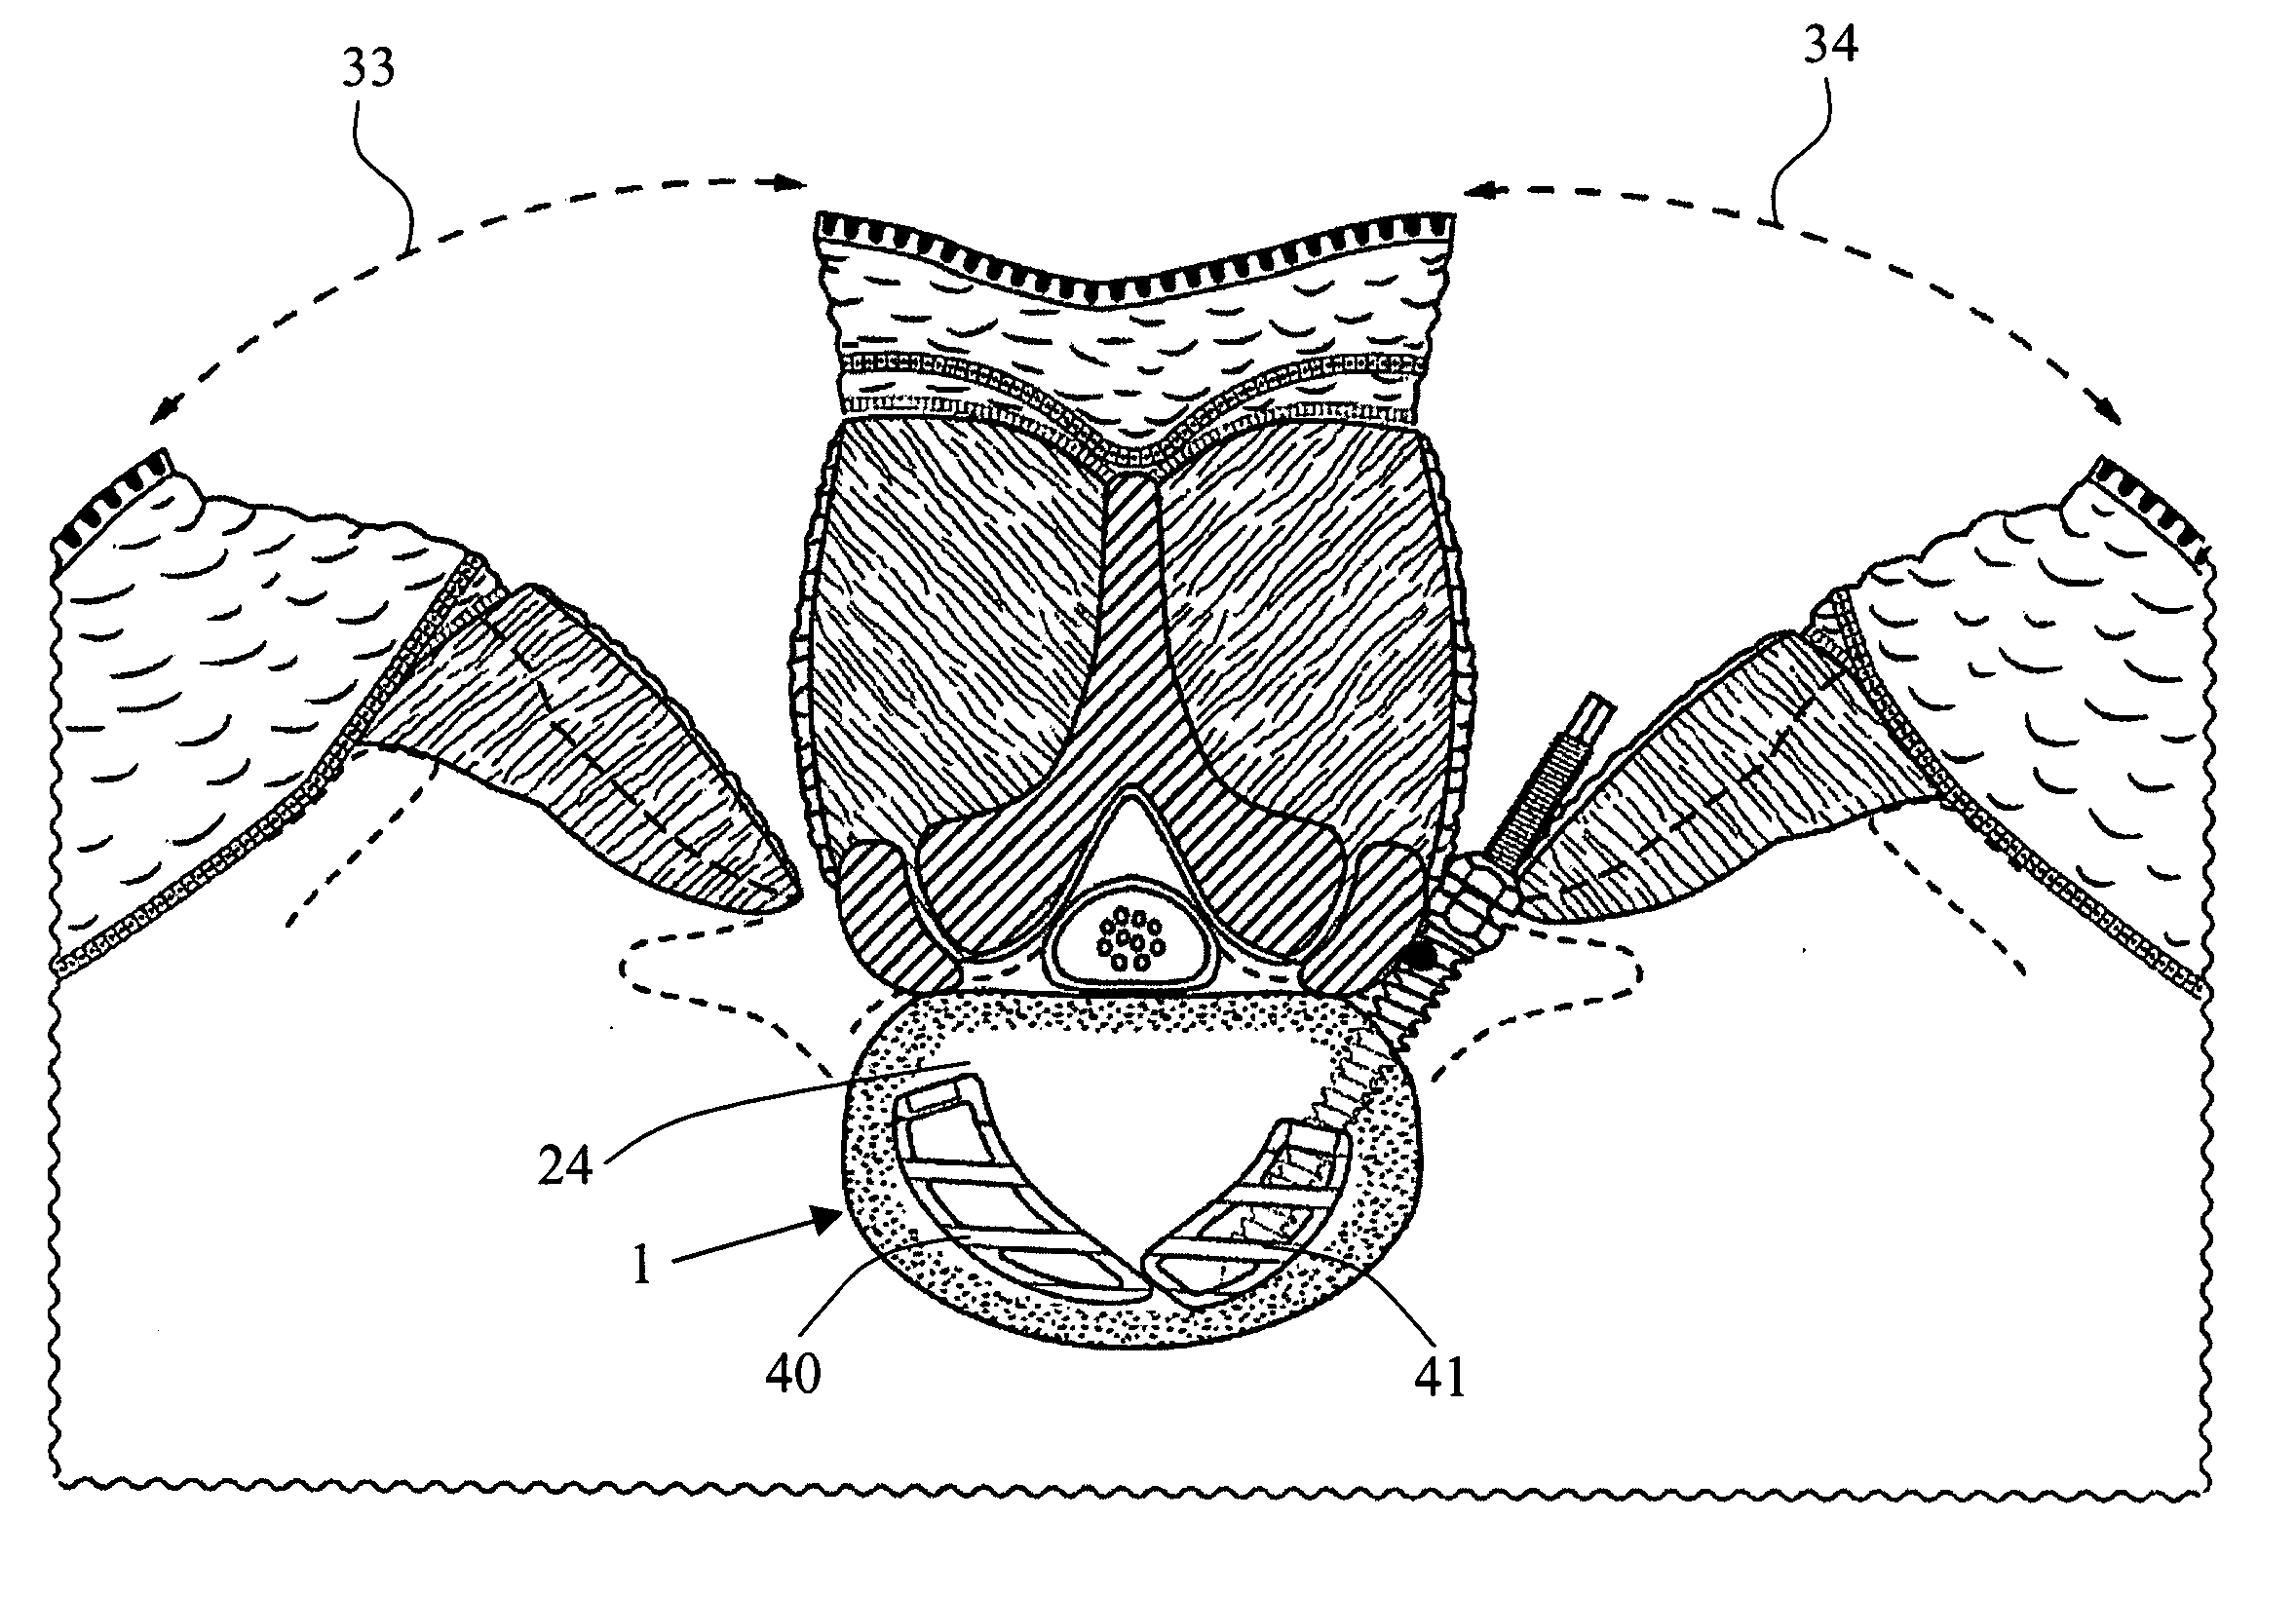 Method for repair of a spine and intervertebral implant